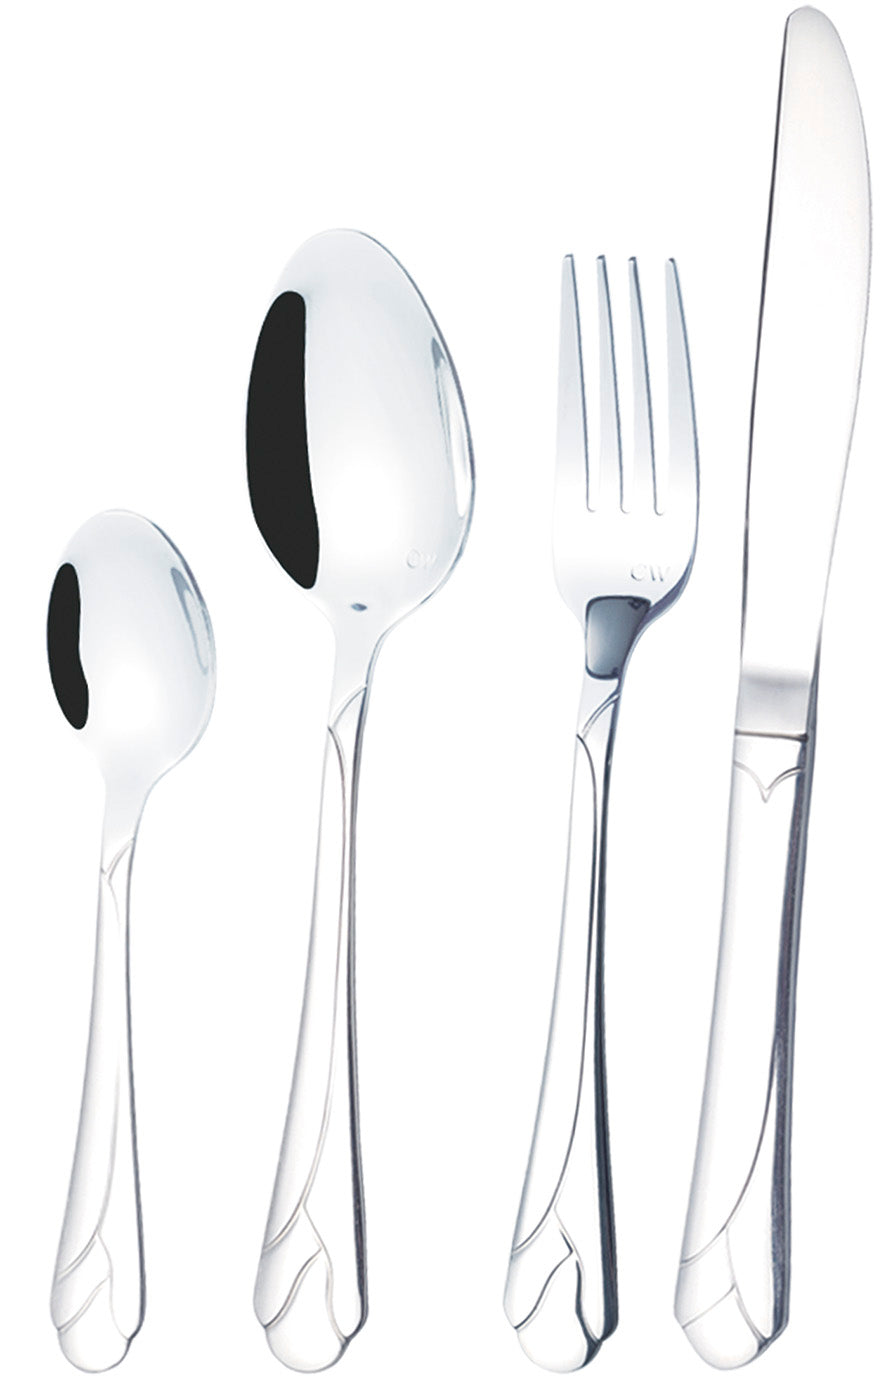 Cutlery from Carl Weill flatware Capri 24-Piece Set Service for 6 people - Royal Gift